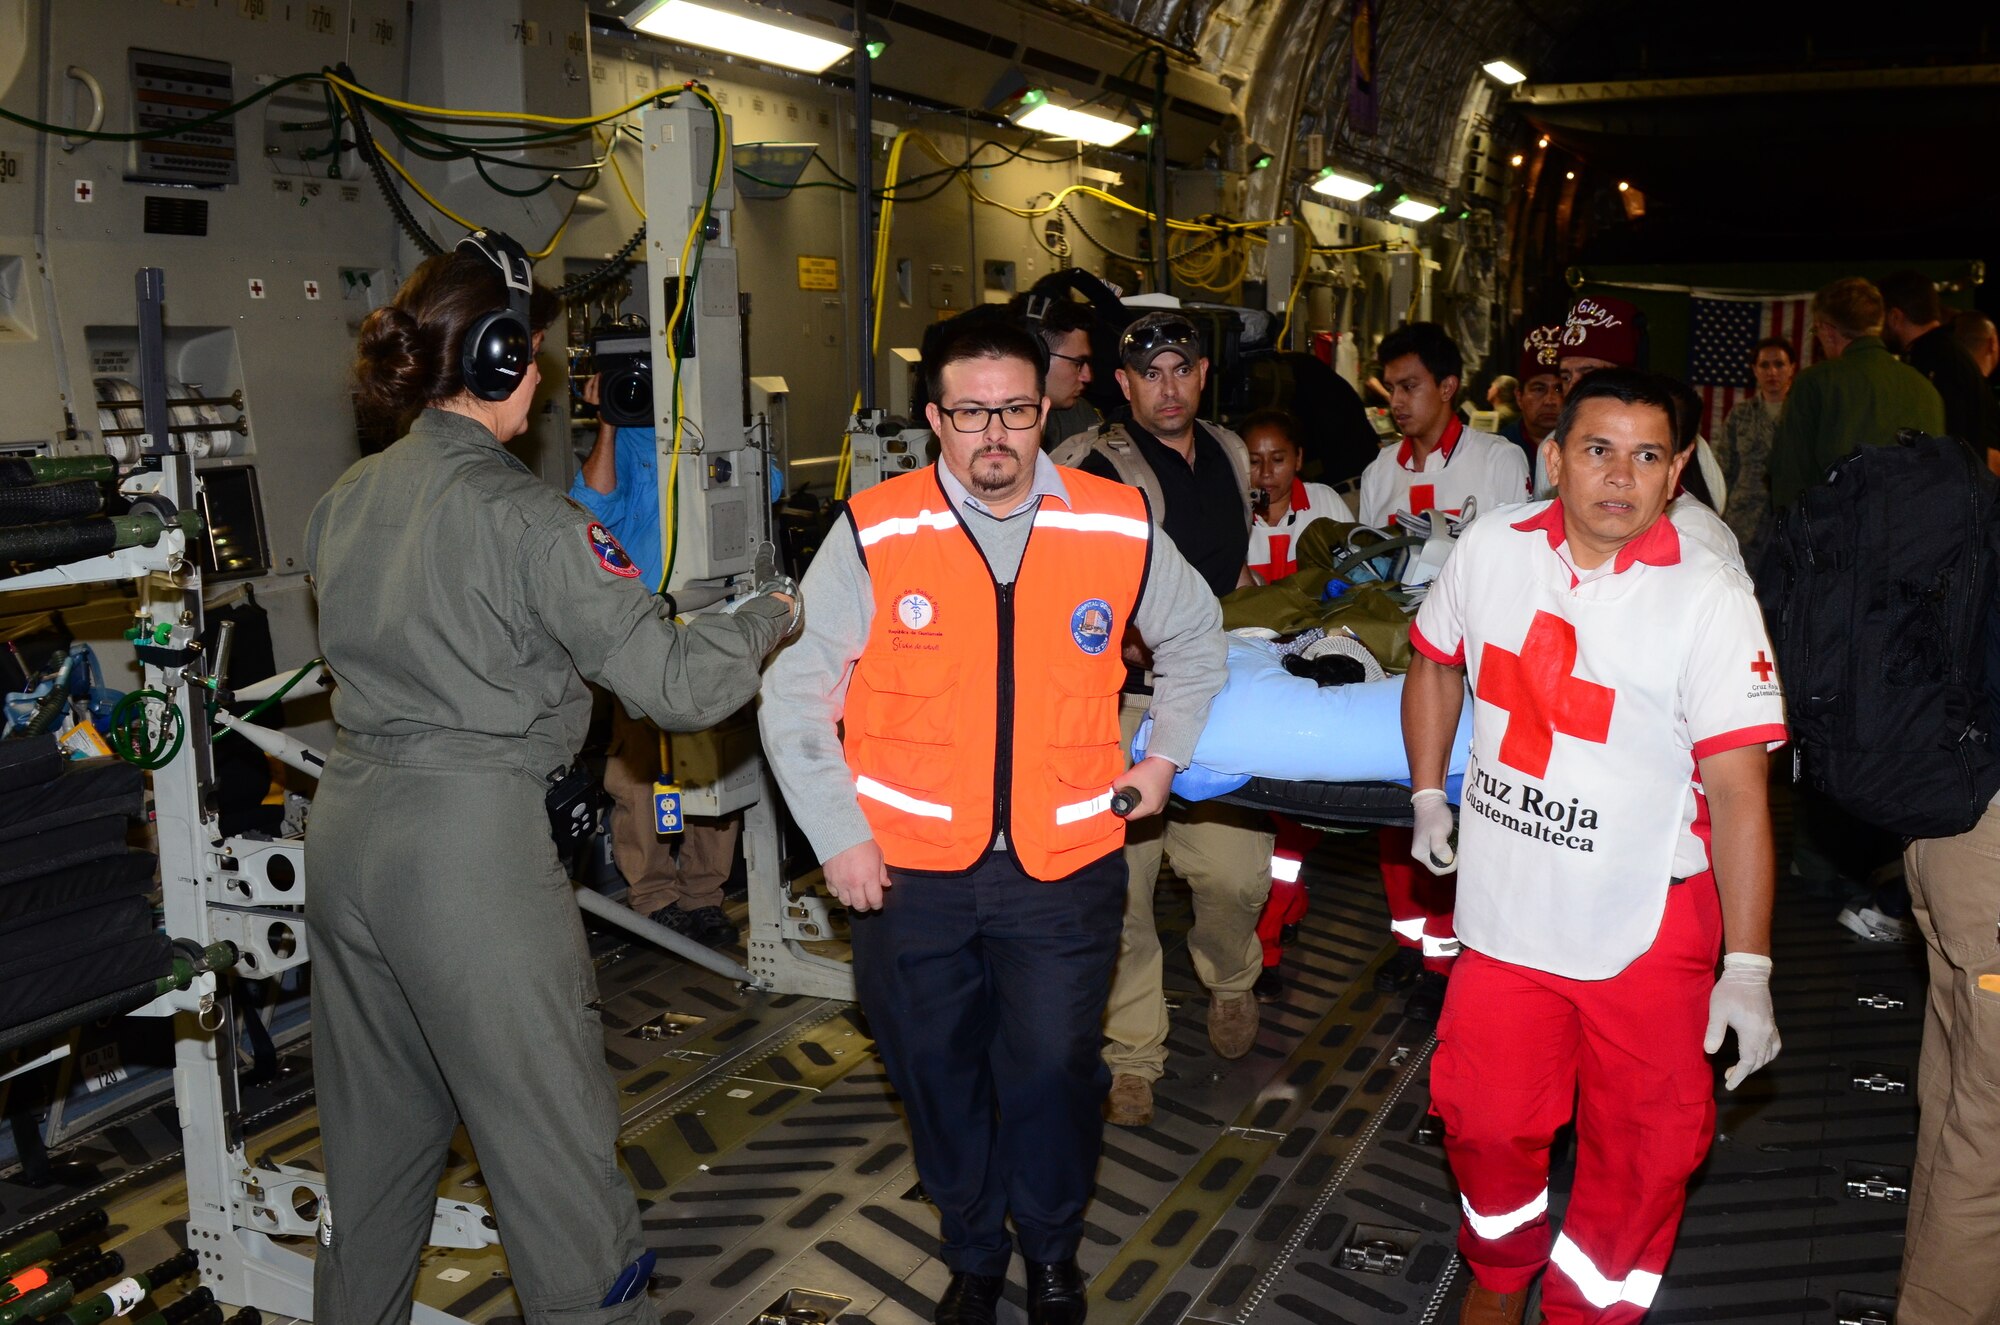 A joint medical team from the Mississippi Air National Guard’s 183rd Air Evacuation Squadron and Joint Base San Antonio, Texas, assists members of the Guatemalan government with loading critically injured patients on a Mississippi ANG's 172nd Airlift Wing C-17 Globemaster III in Guatemala, June 6, 2018. The humanitarian aeromedical evacuation mission followed the recent eruption of Fuego Volcano. (U.S. Air National Guard photo by Tech. Sgt. Edward Staton)